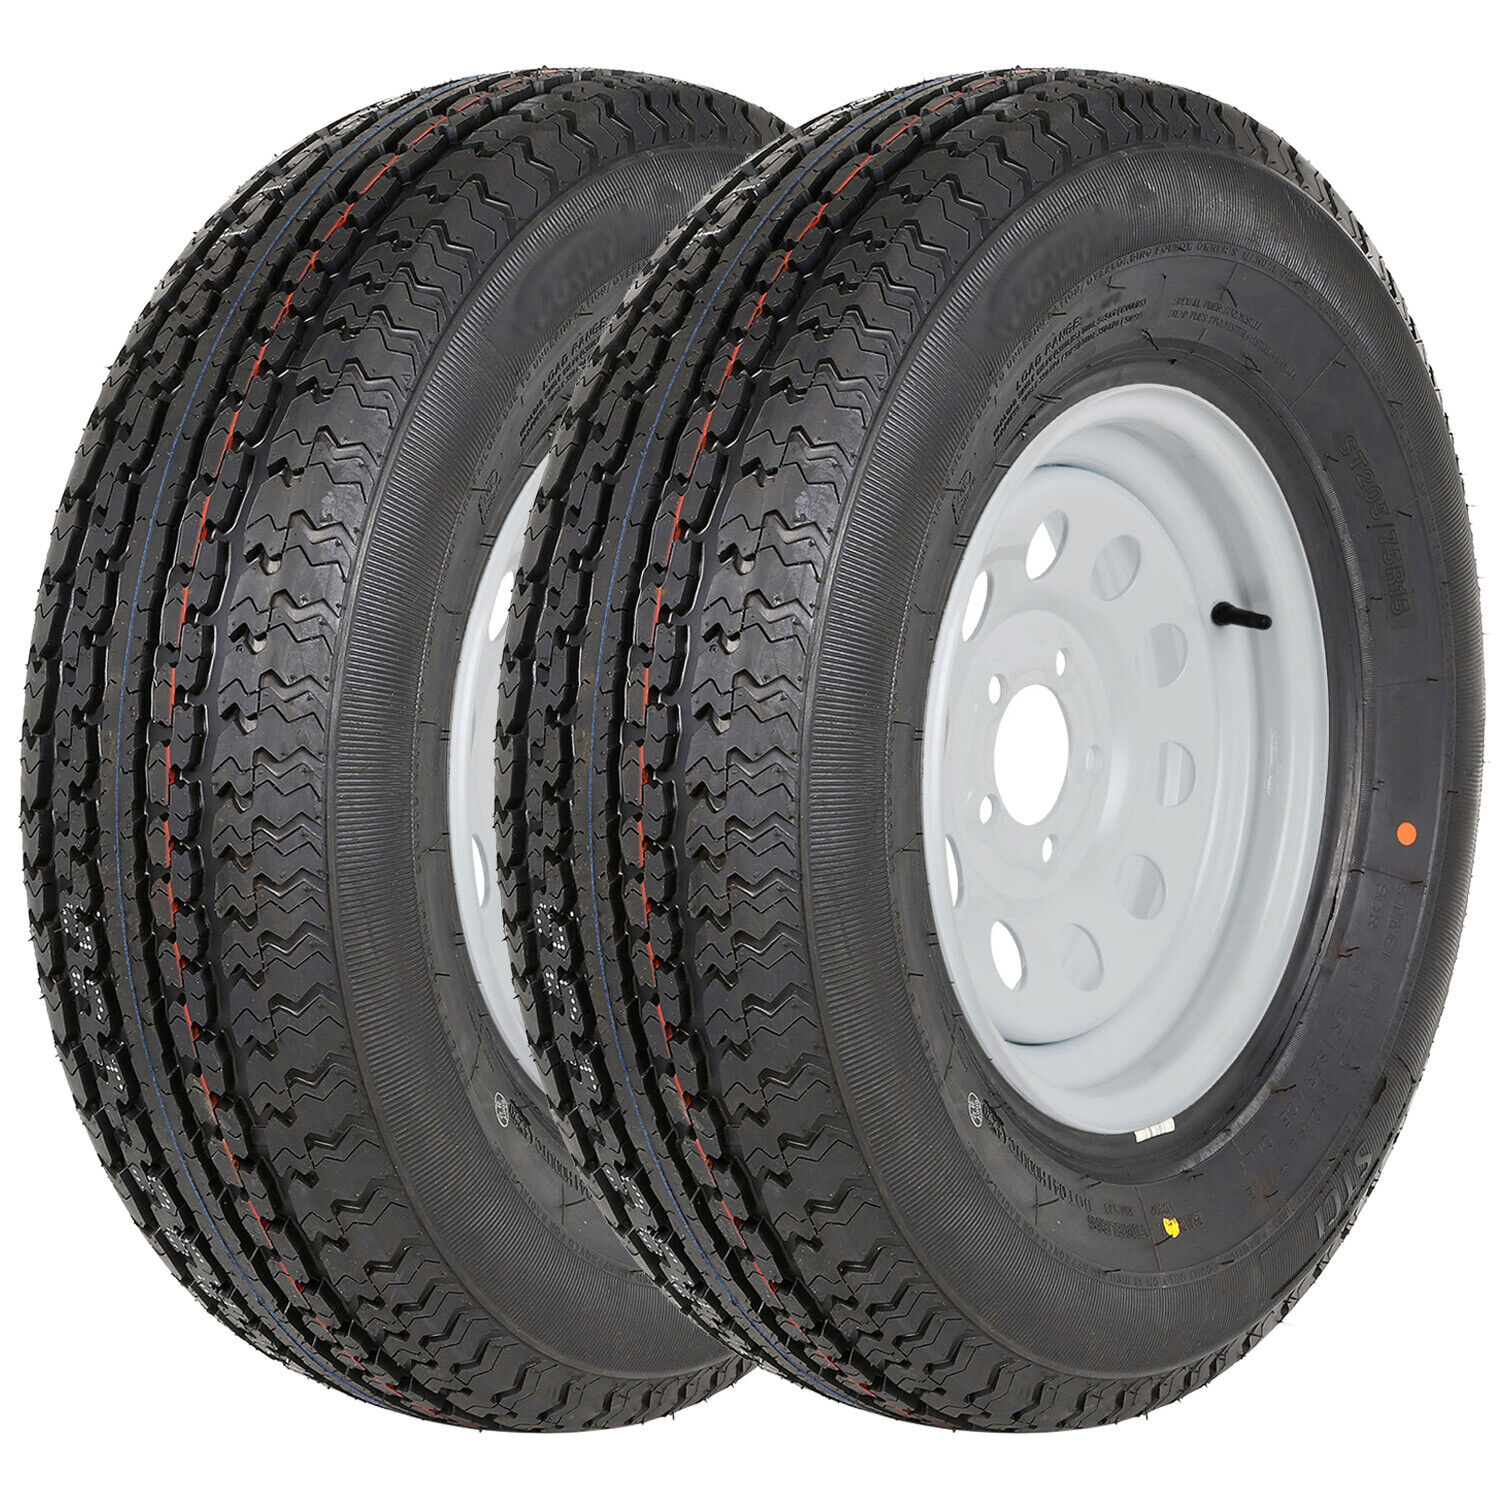 2 pack ST205/75R15 205 75R15 Radial Trailer Tire with Rim, 8-Ply Load Range D 